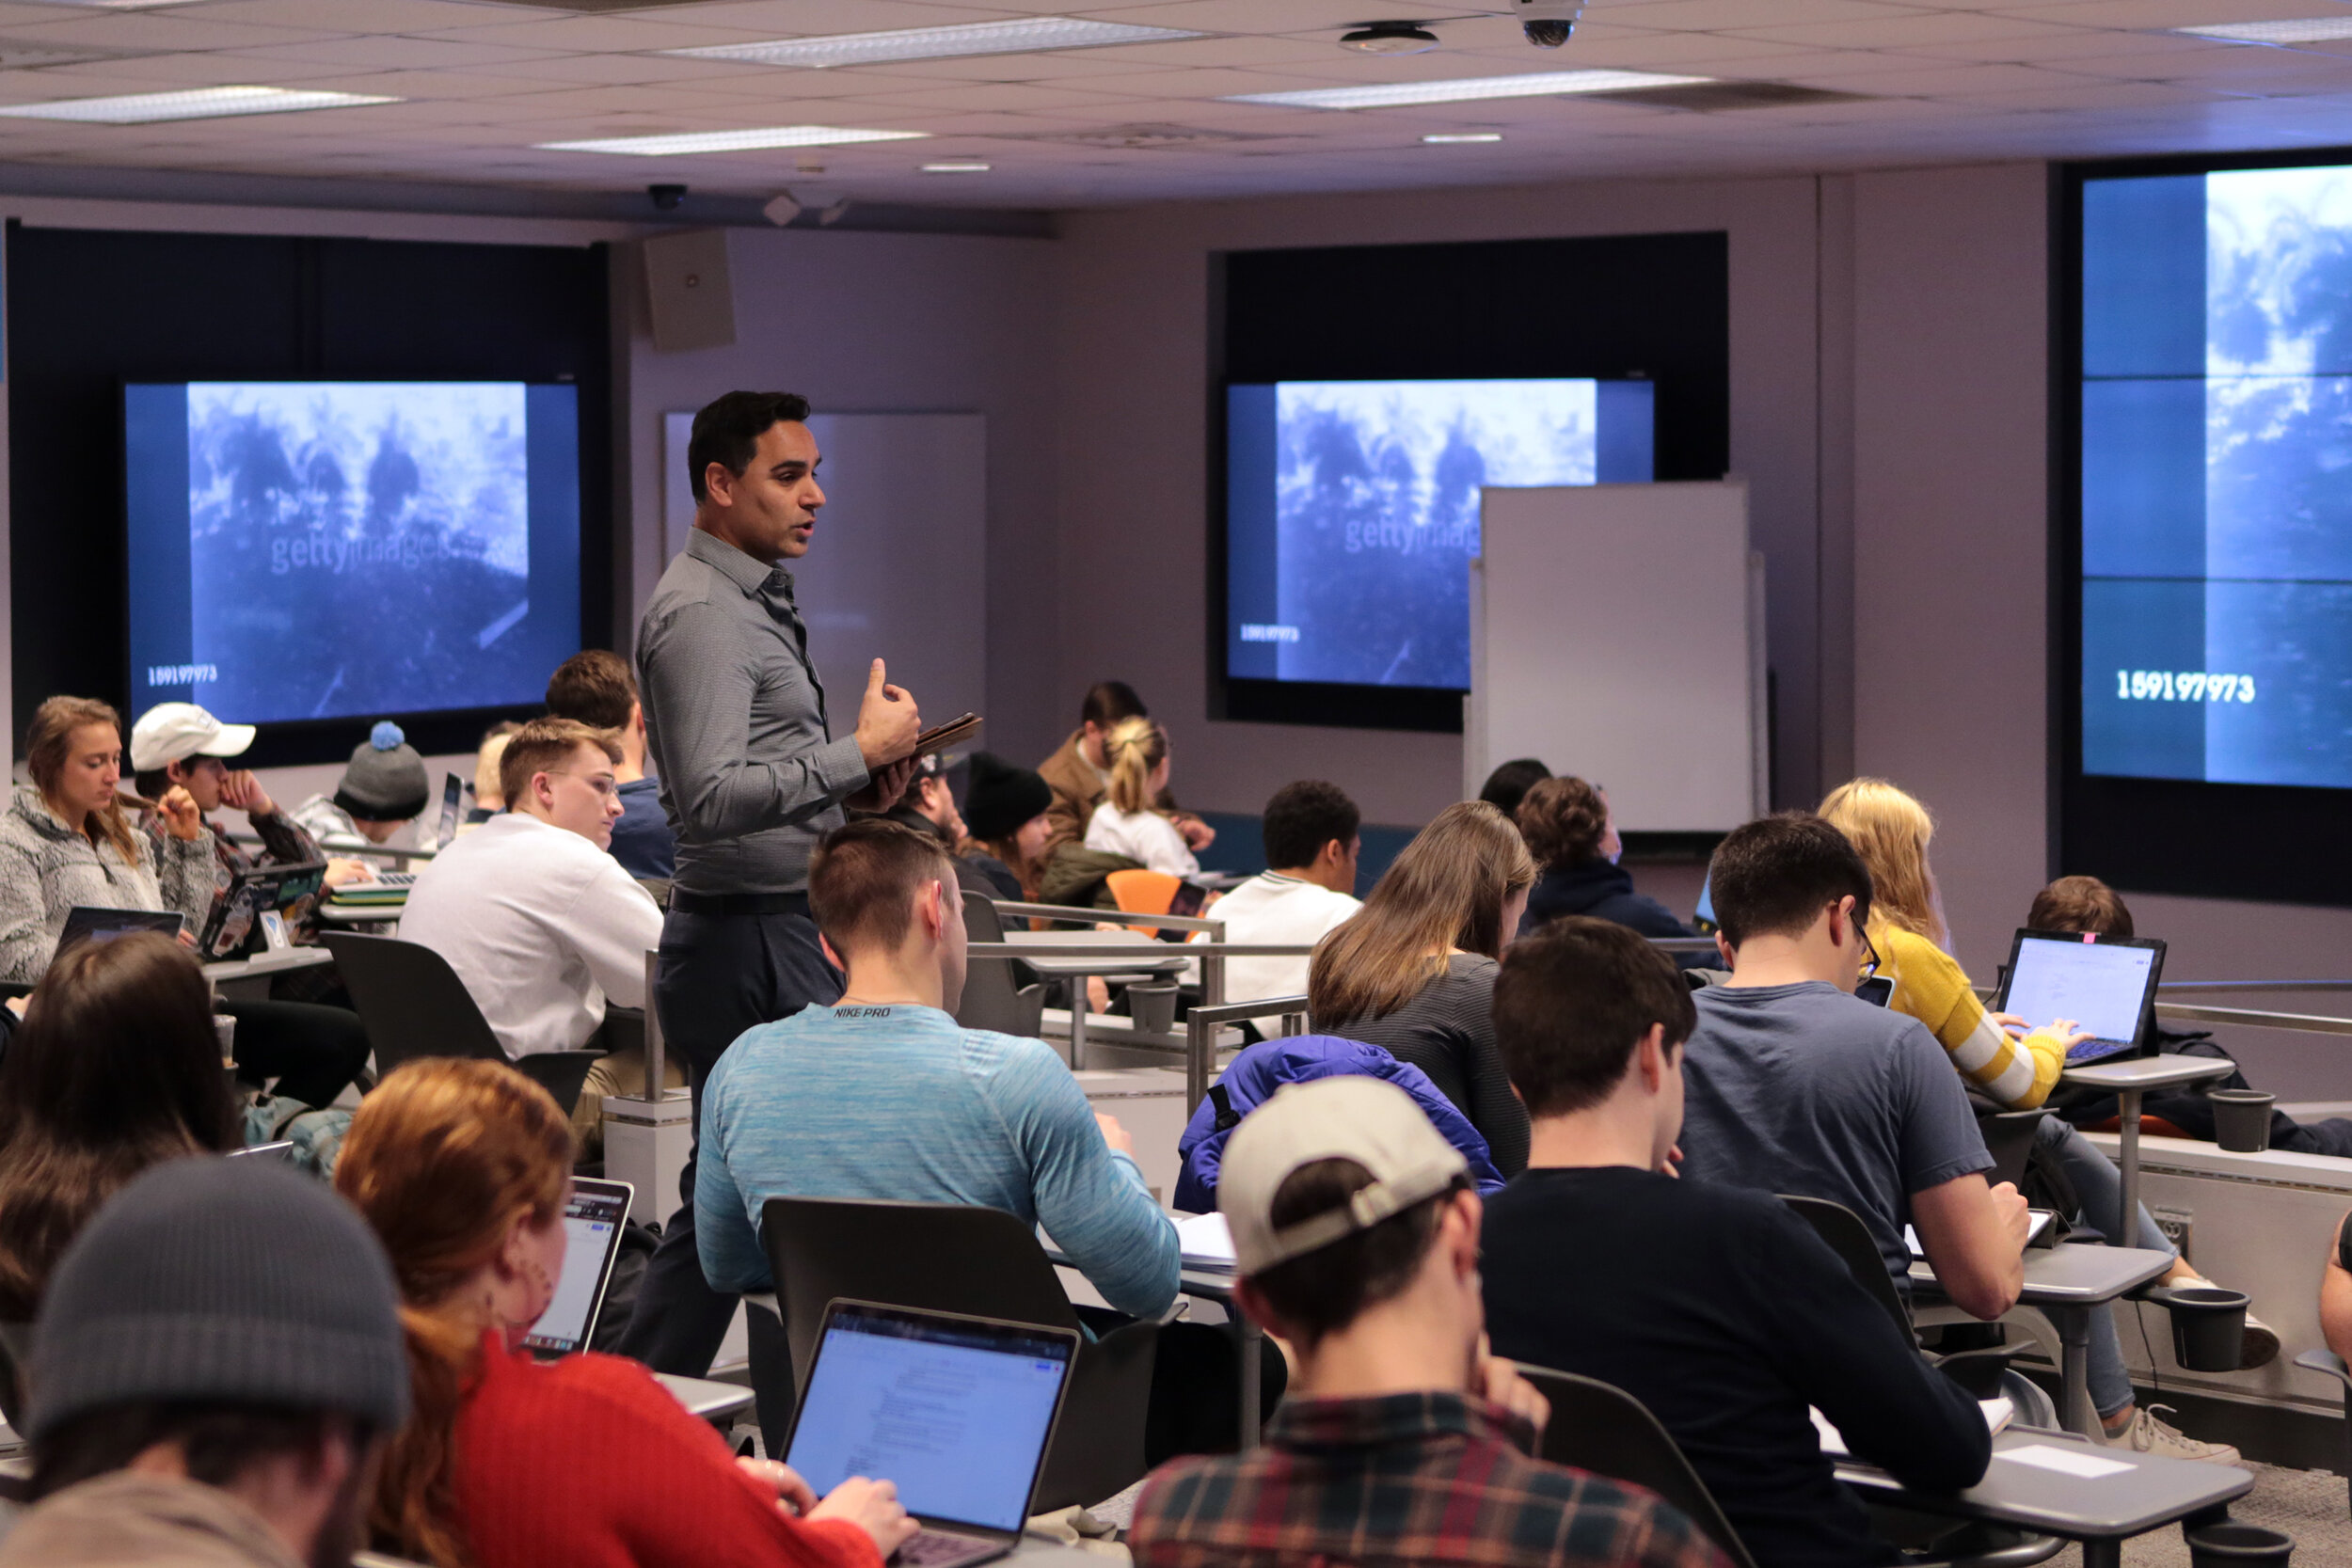 Professor La Serna stands in the middle of a classroom of students gesturing and seemingly mid-sentence. Students in seats around him take notes and we can see three screens projecting documentary footage around the classroom.